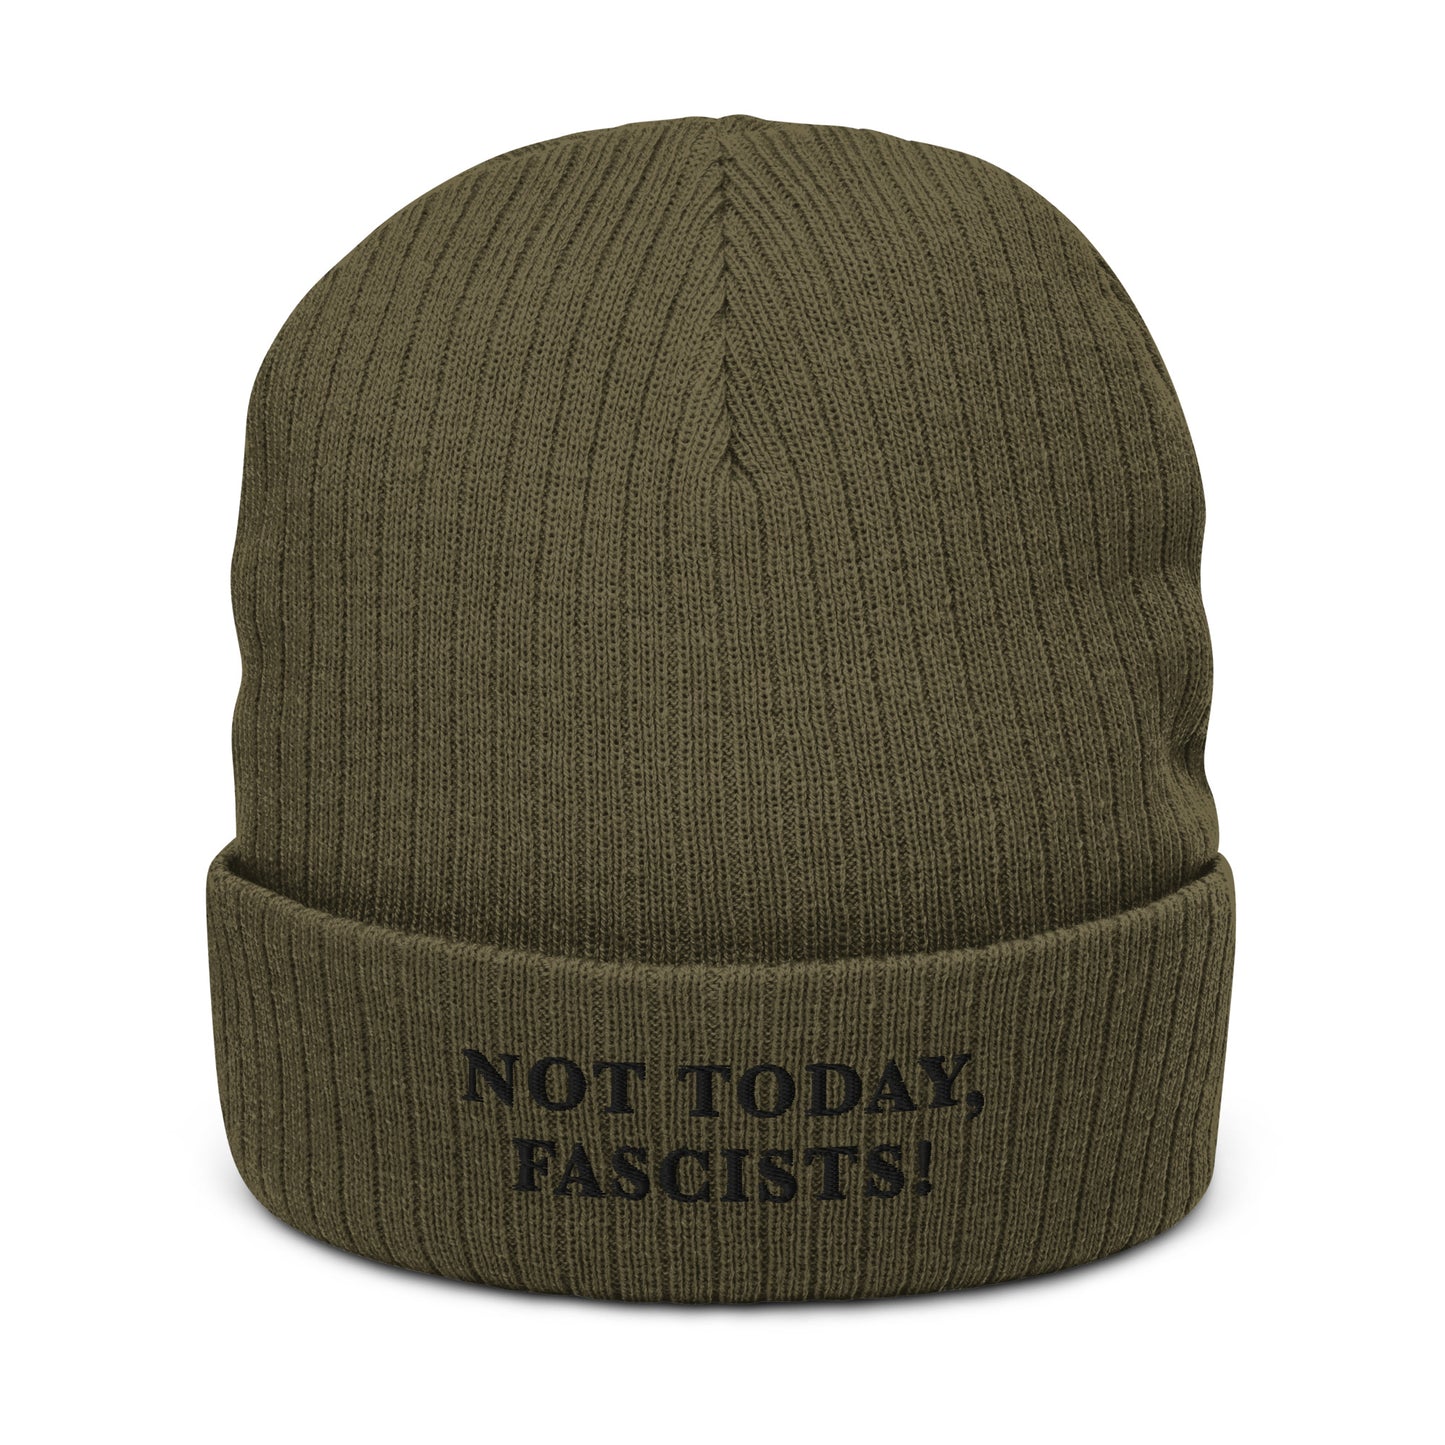 Not Today, Fascists! - Ribbed Knit Beanie